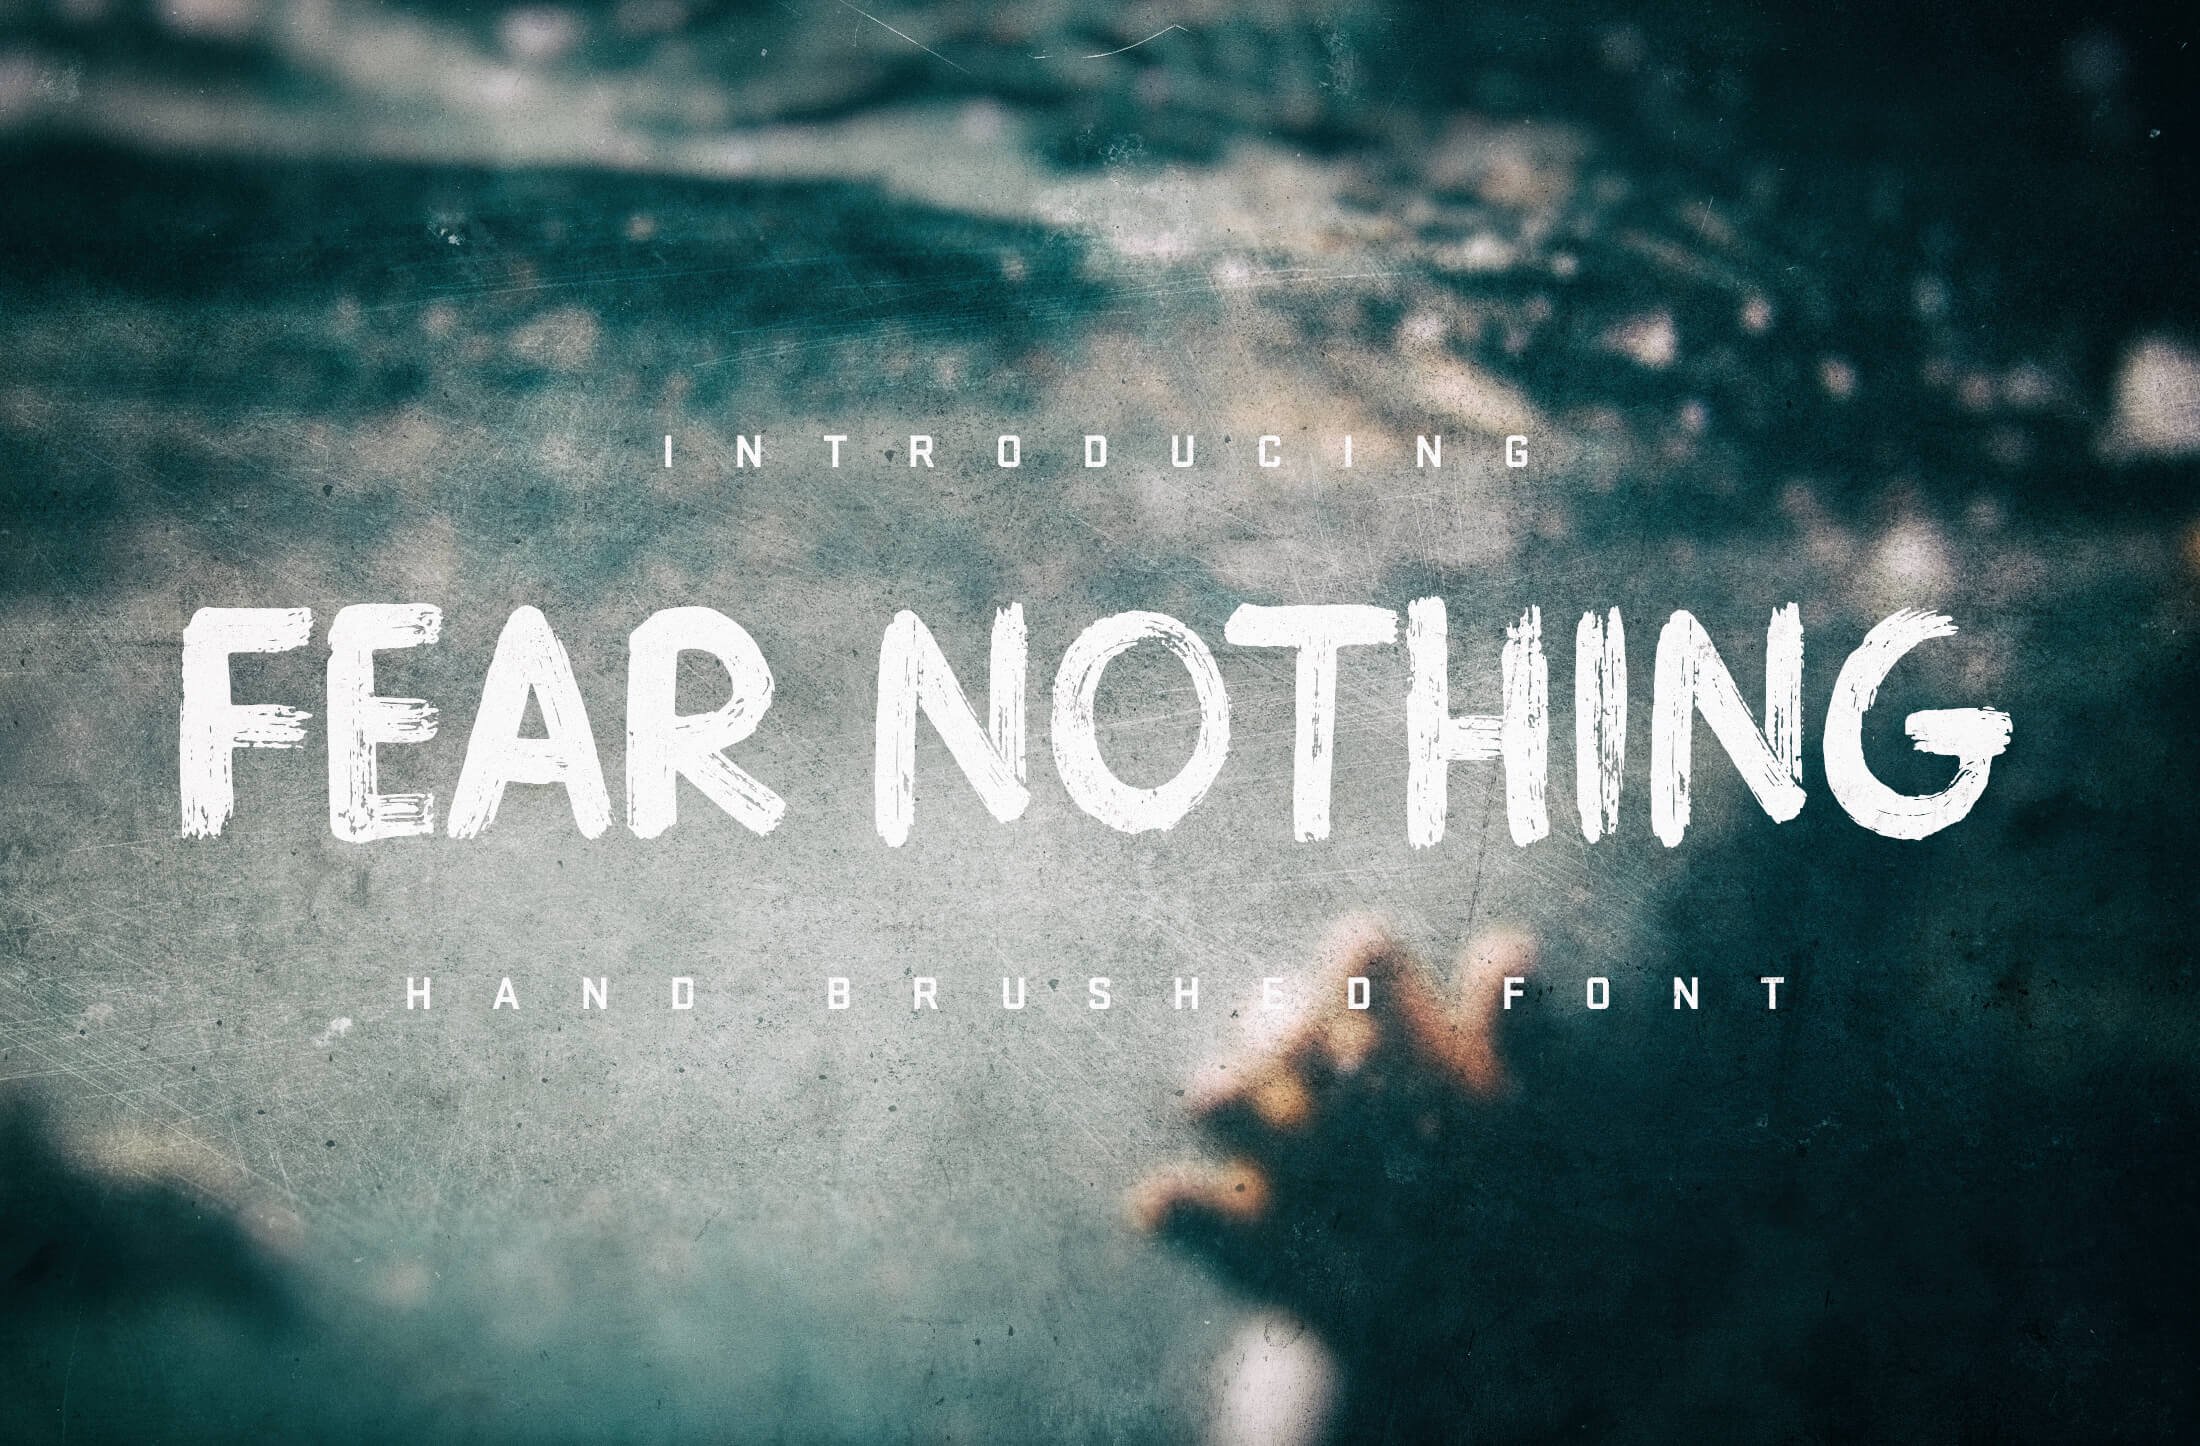 Fear Nothing Brush Font cover image.